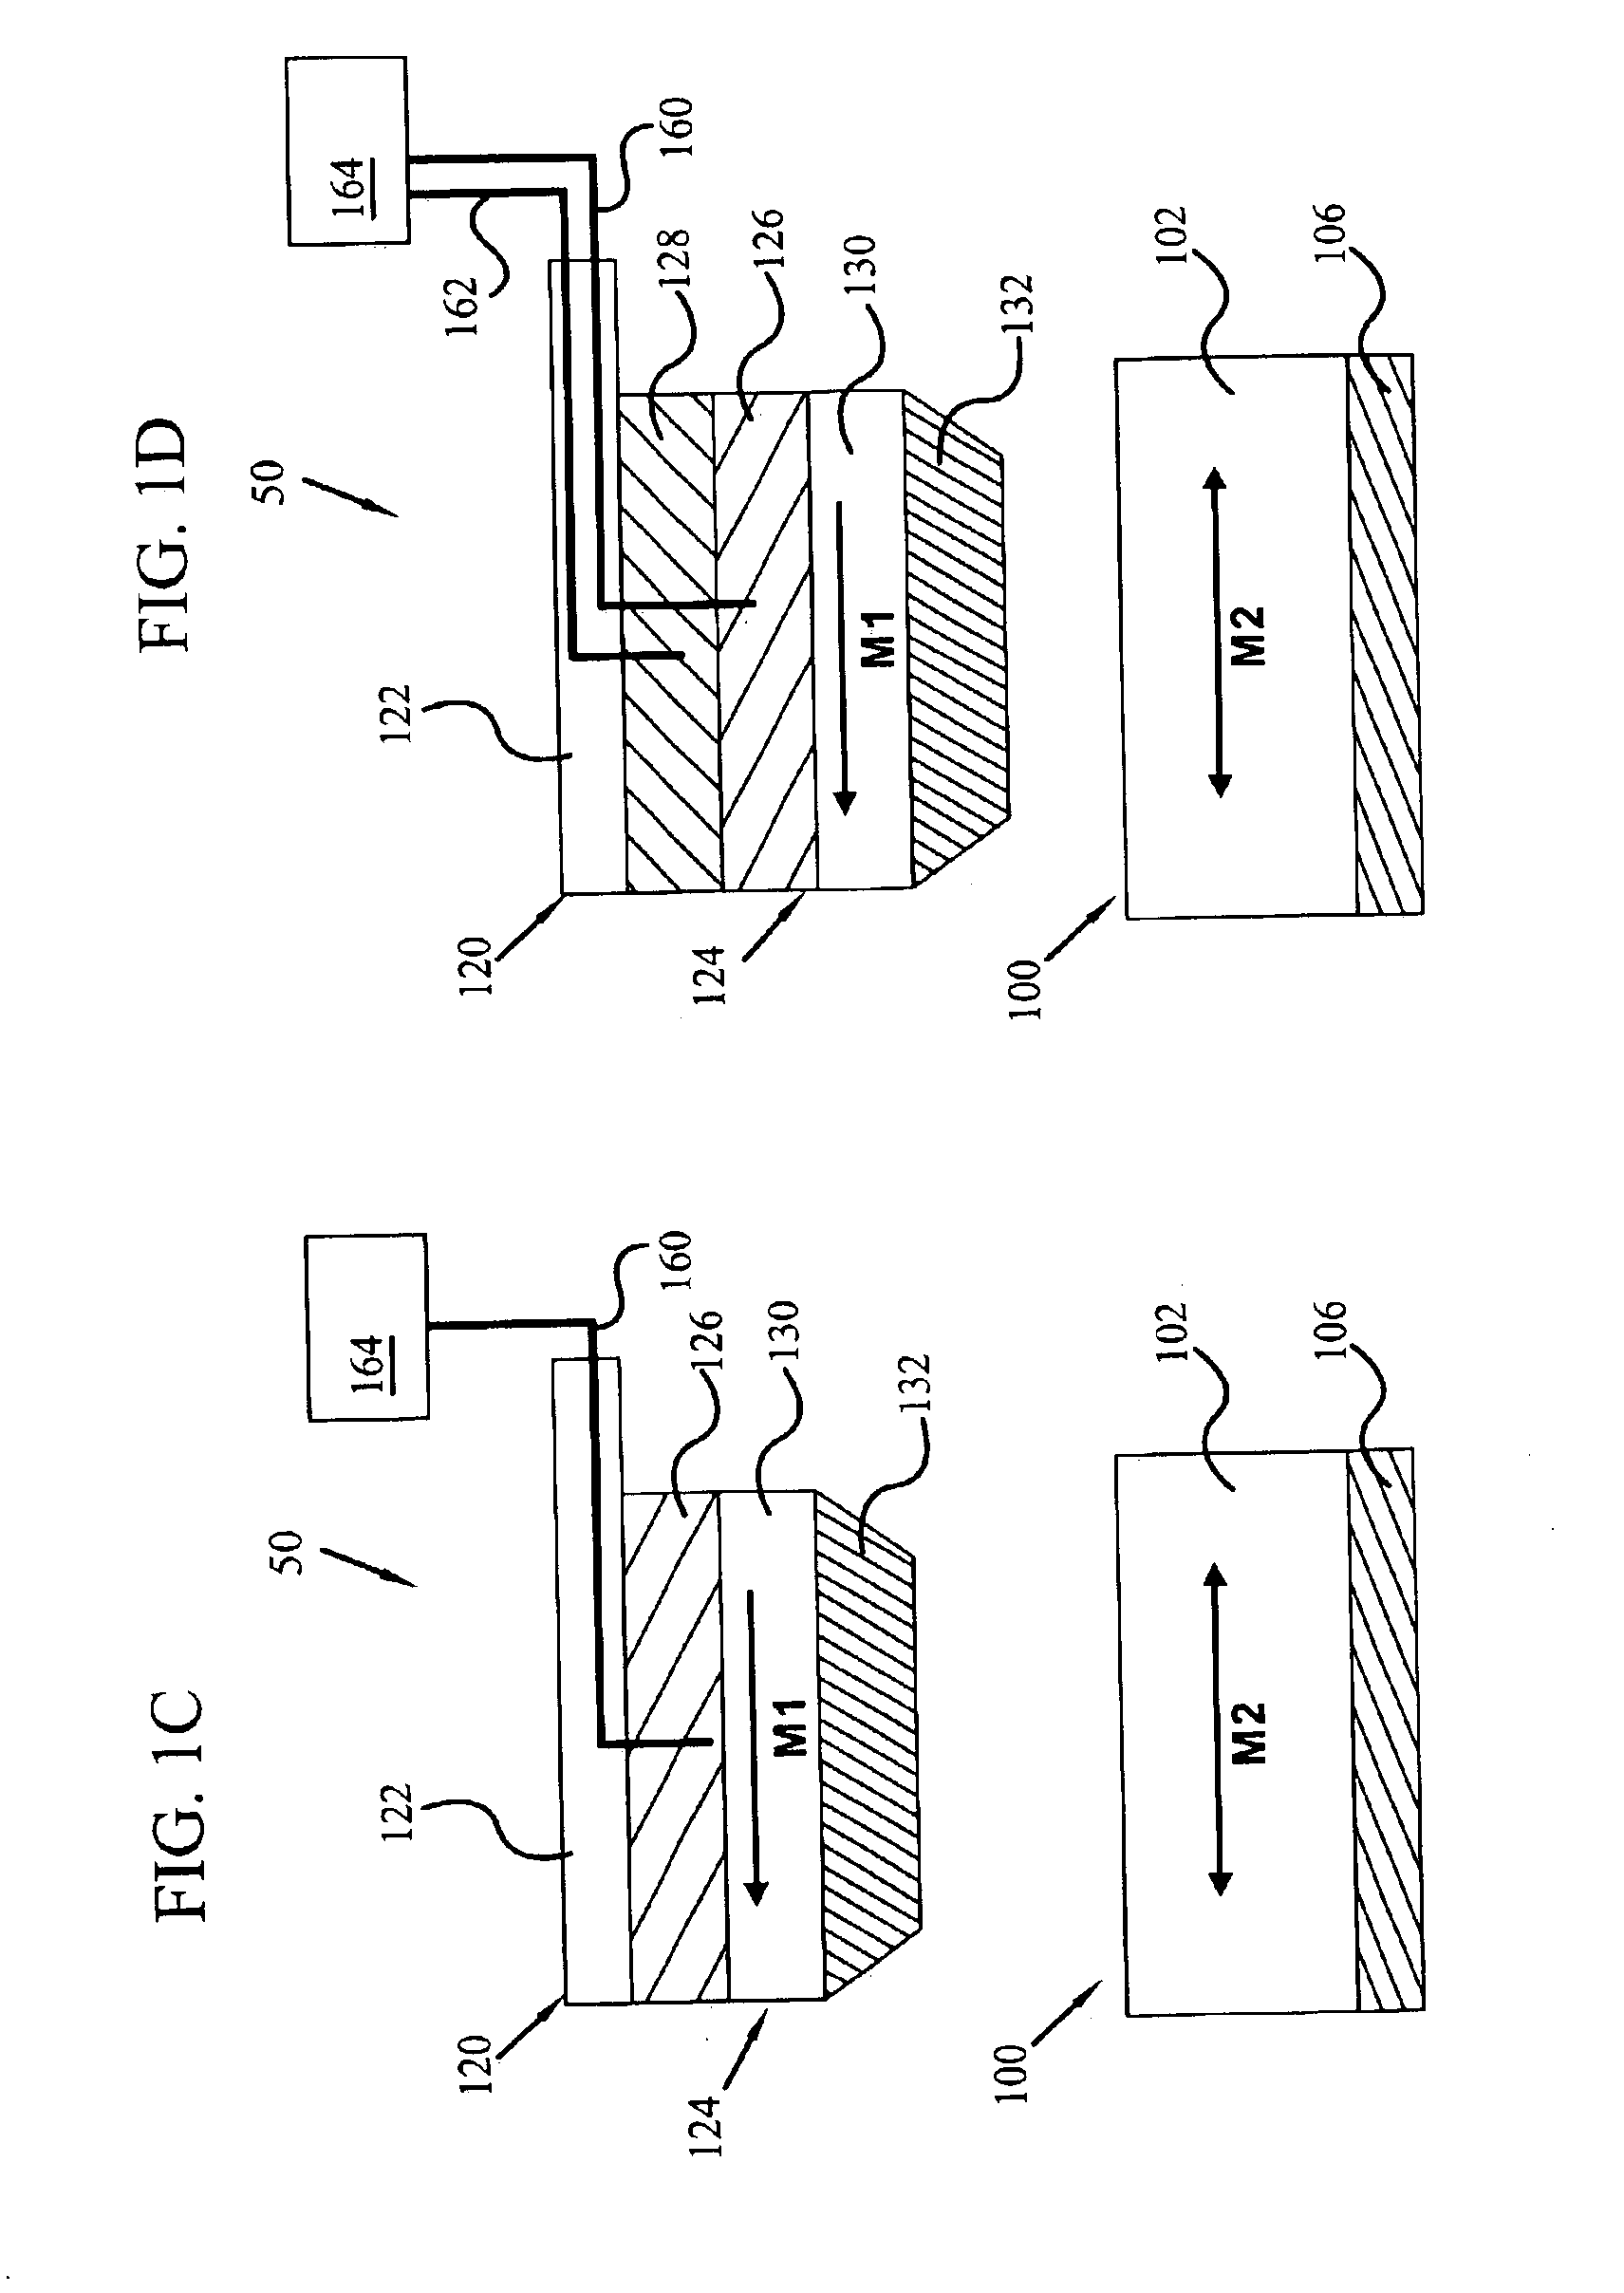 Magnetic memory storage device